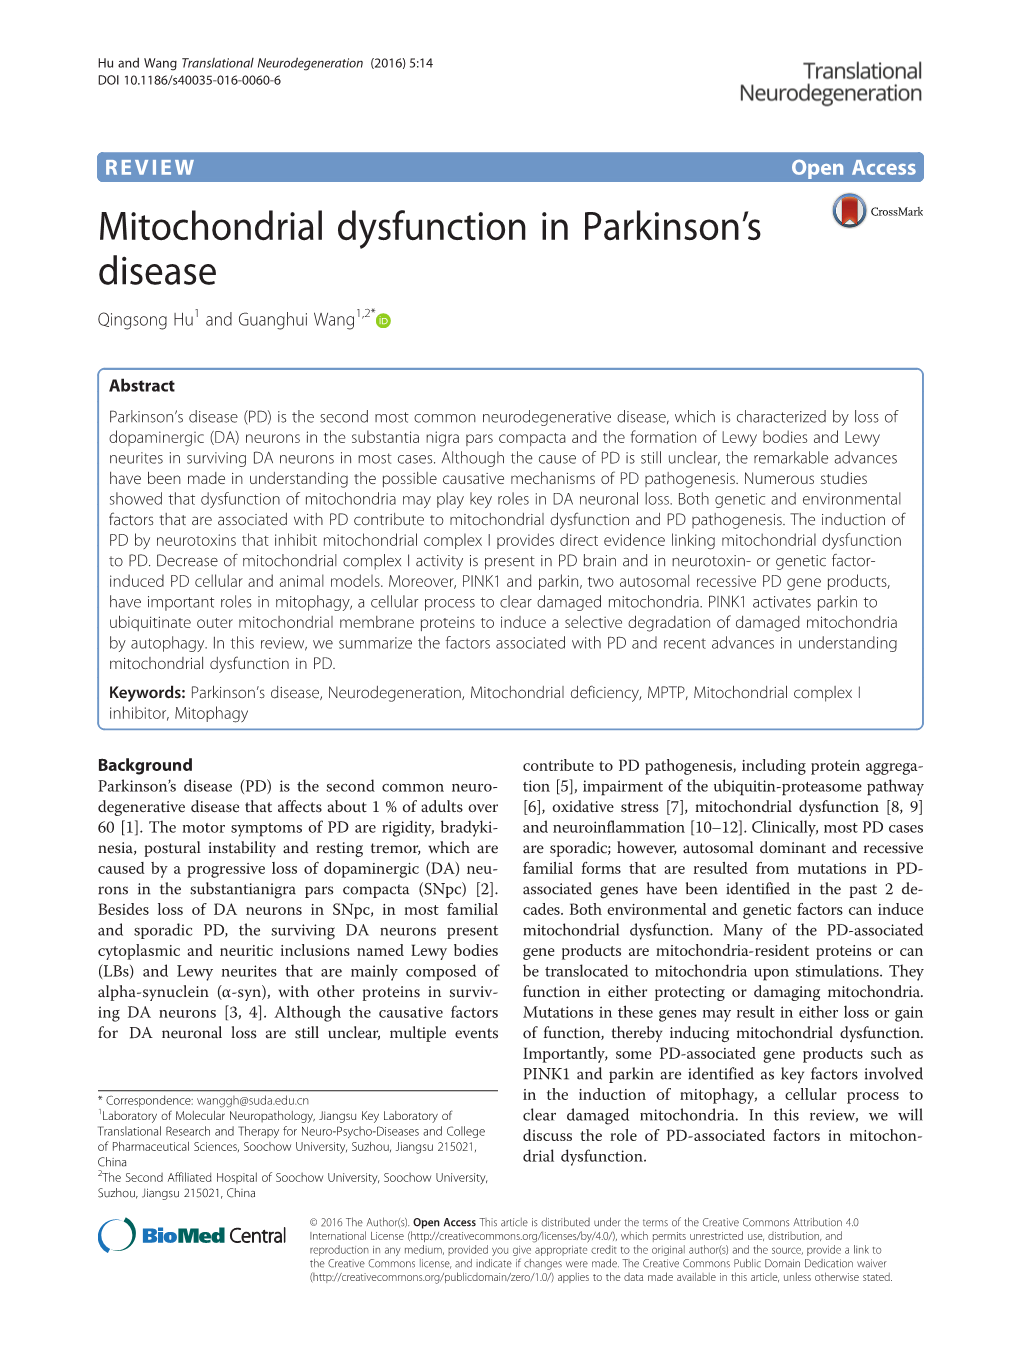 Mitochondrial Dysfunction in Parkinson's Disease